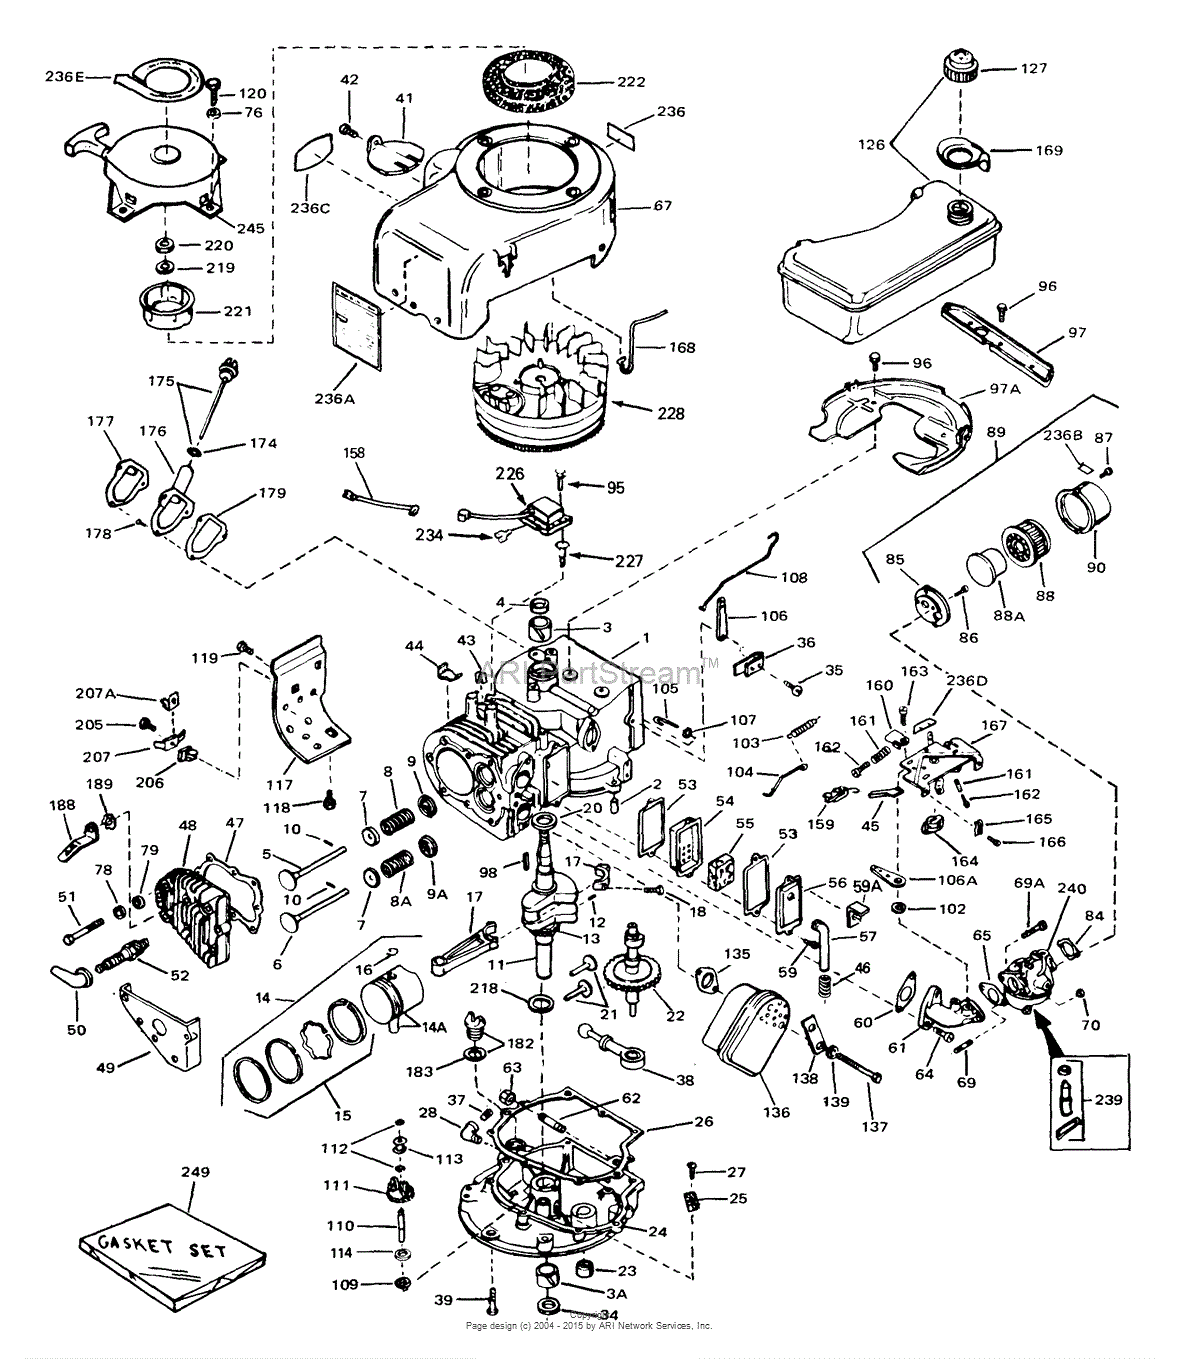 Tecumseh VH70-135020A Parts Diagram for Engine Parts List #1 2000 volvo truck stereo wiring 